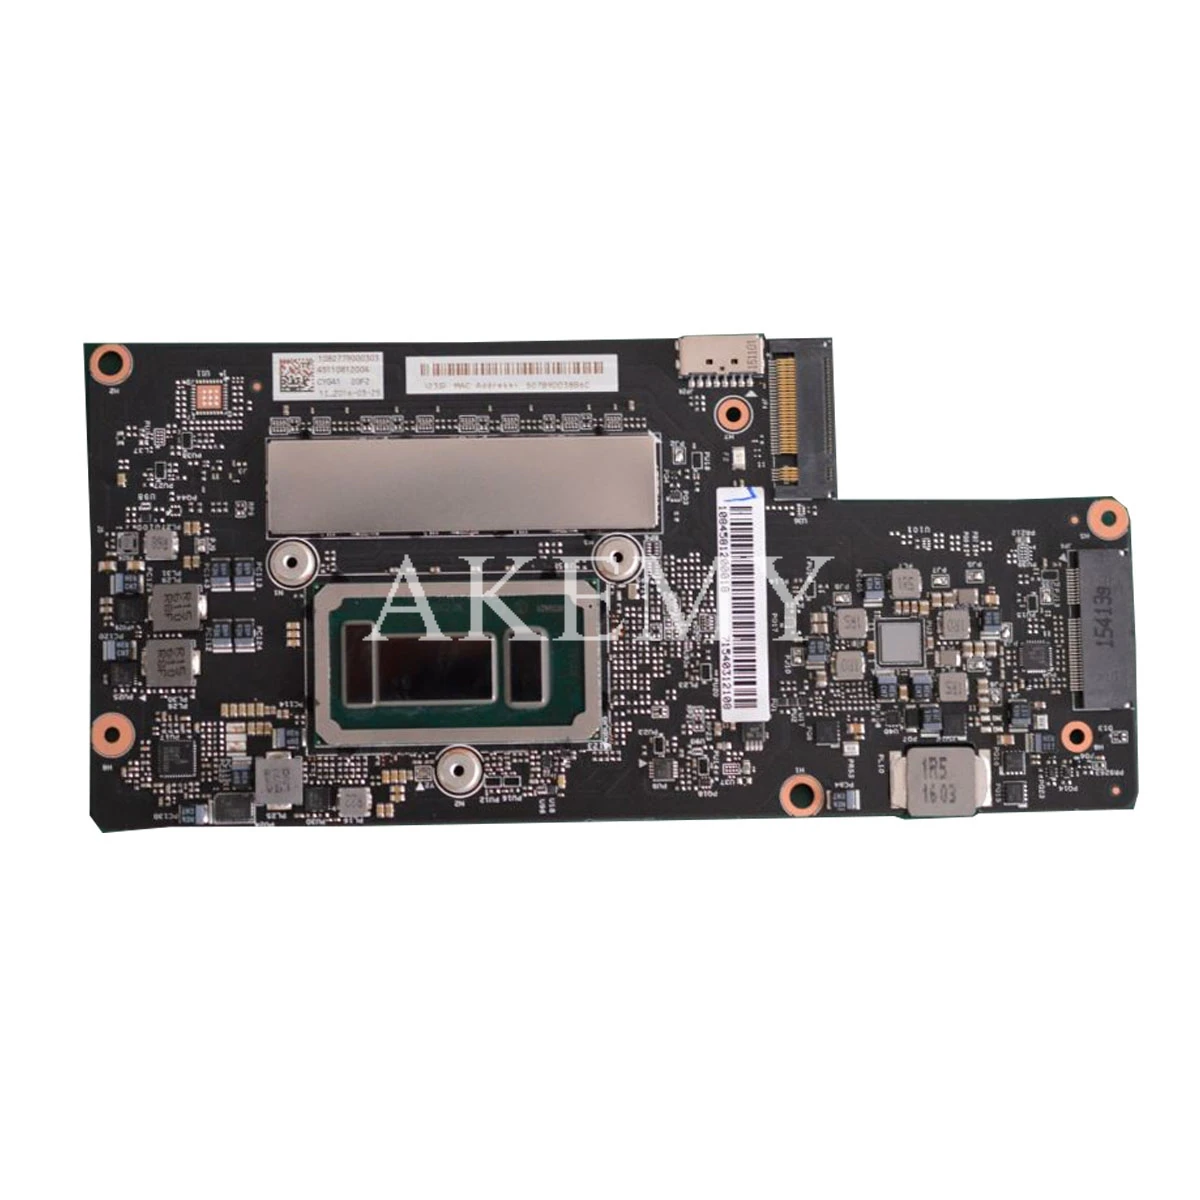 for lenovo yoga 900 13isk laptop motherboard with byg40 nm a921 i7 6560u cpu 8gb ram for lenovo nm a921 free global shipping